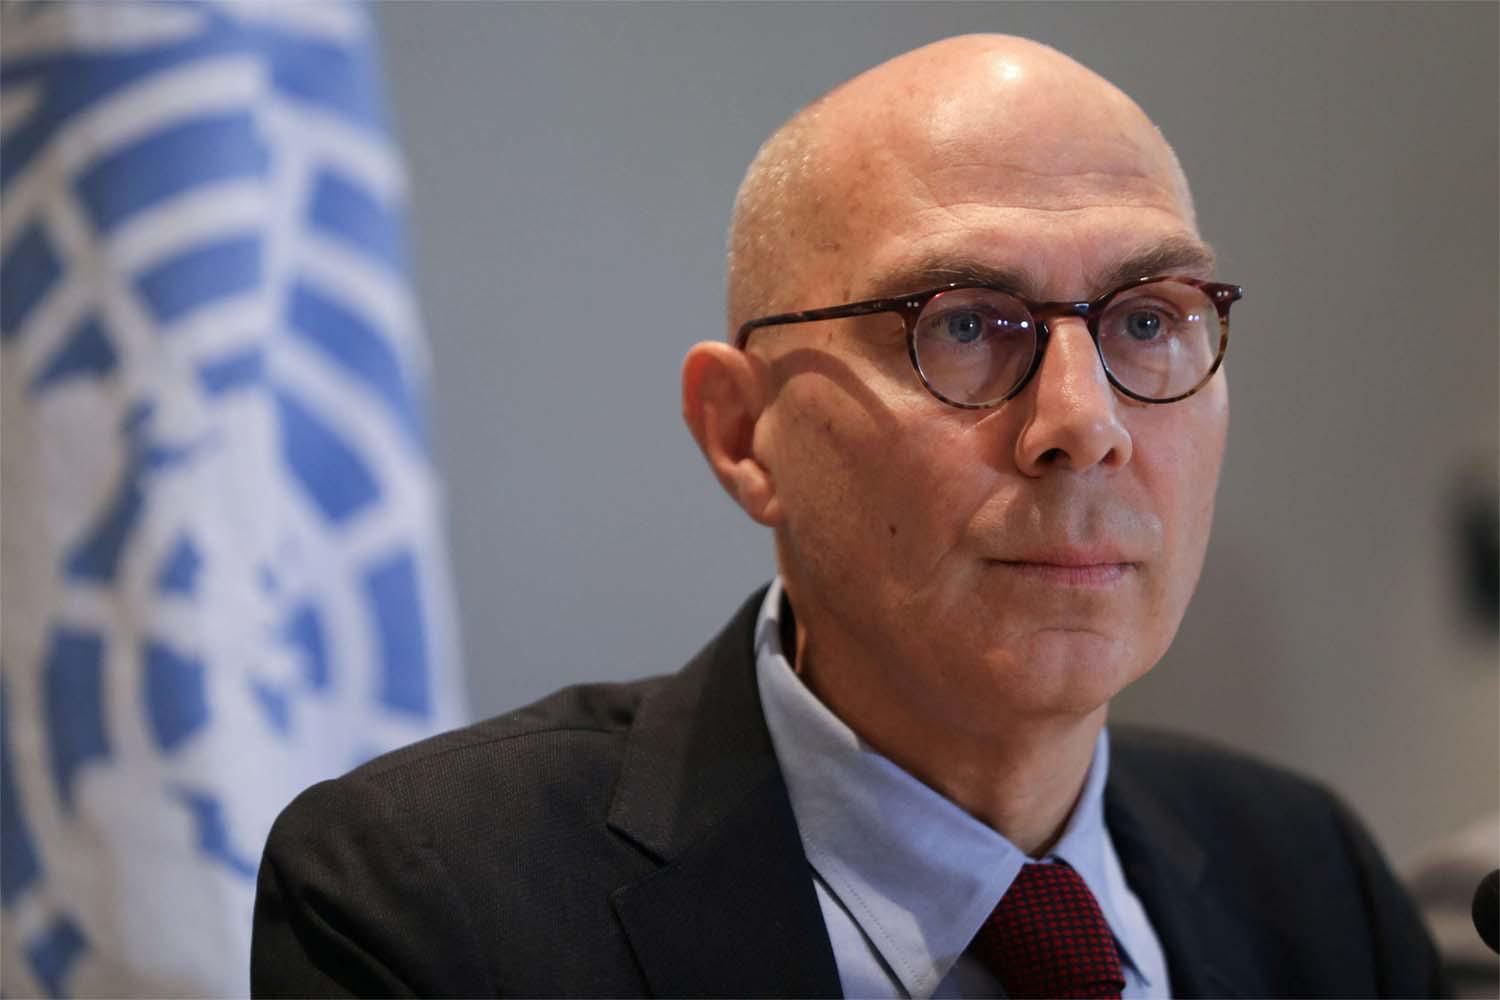 UN High Commissioner for Human Rights Volker Turk